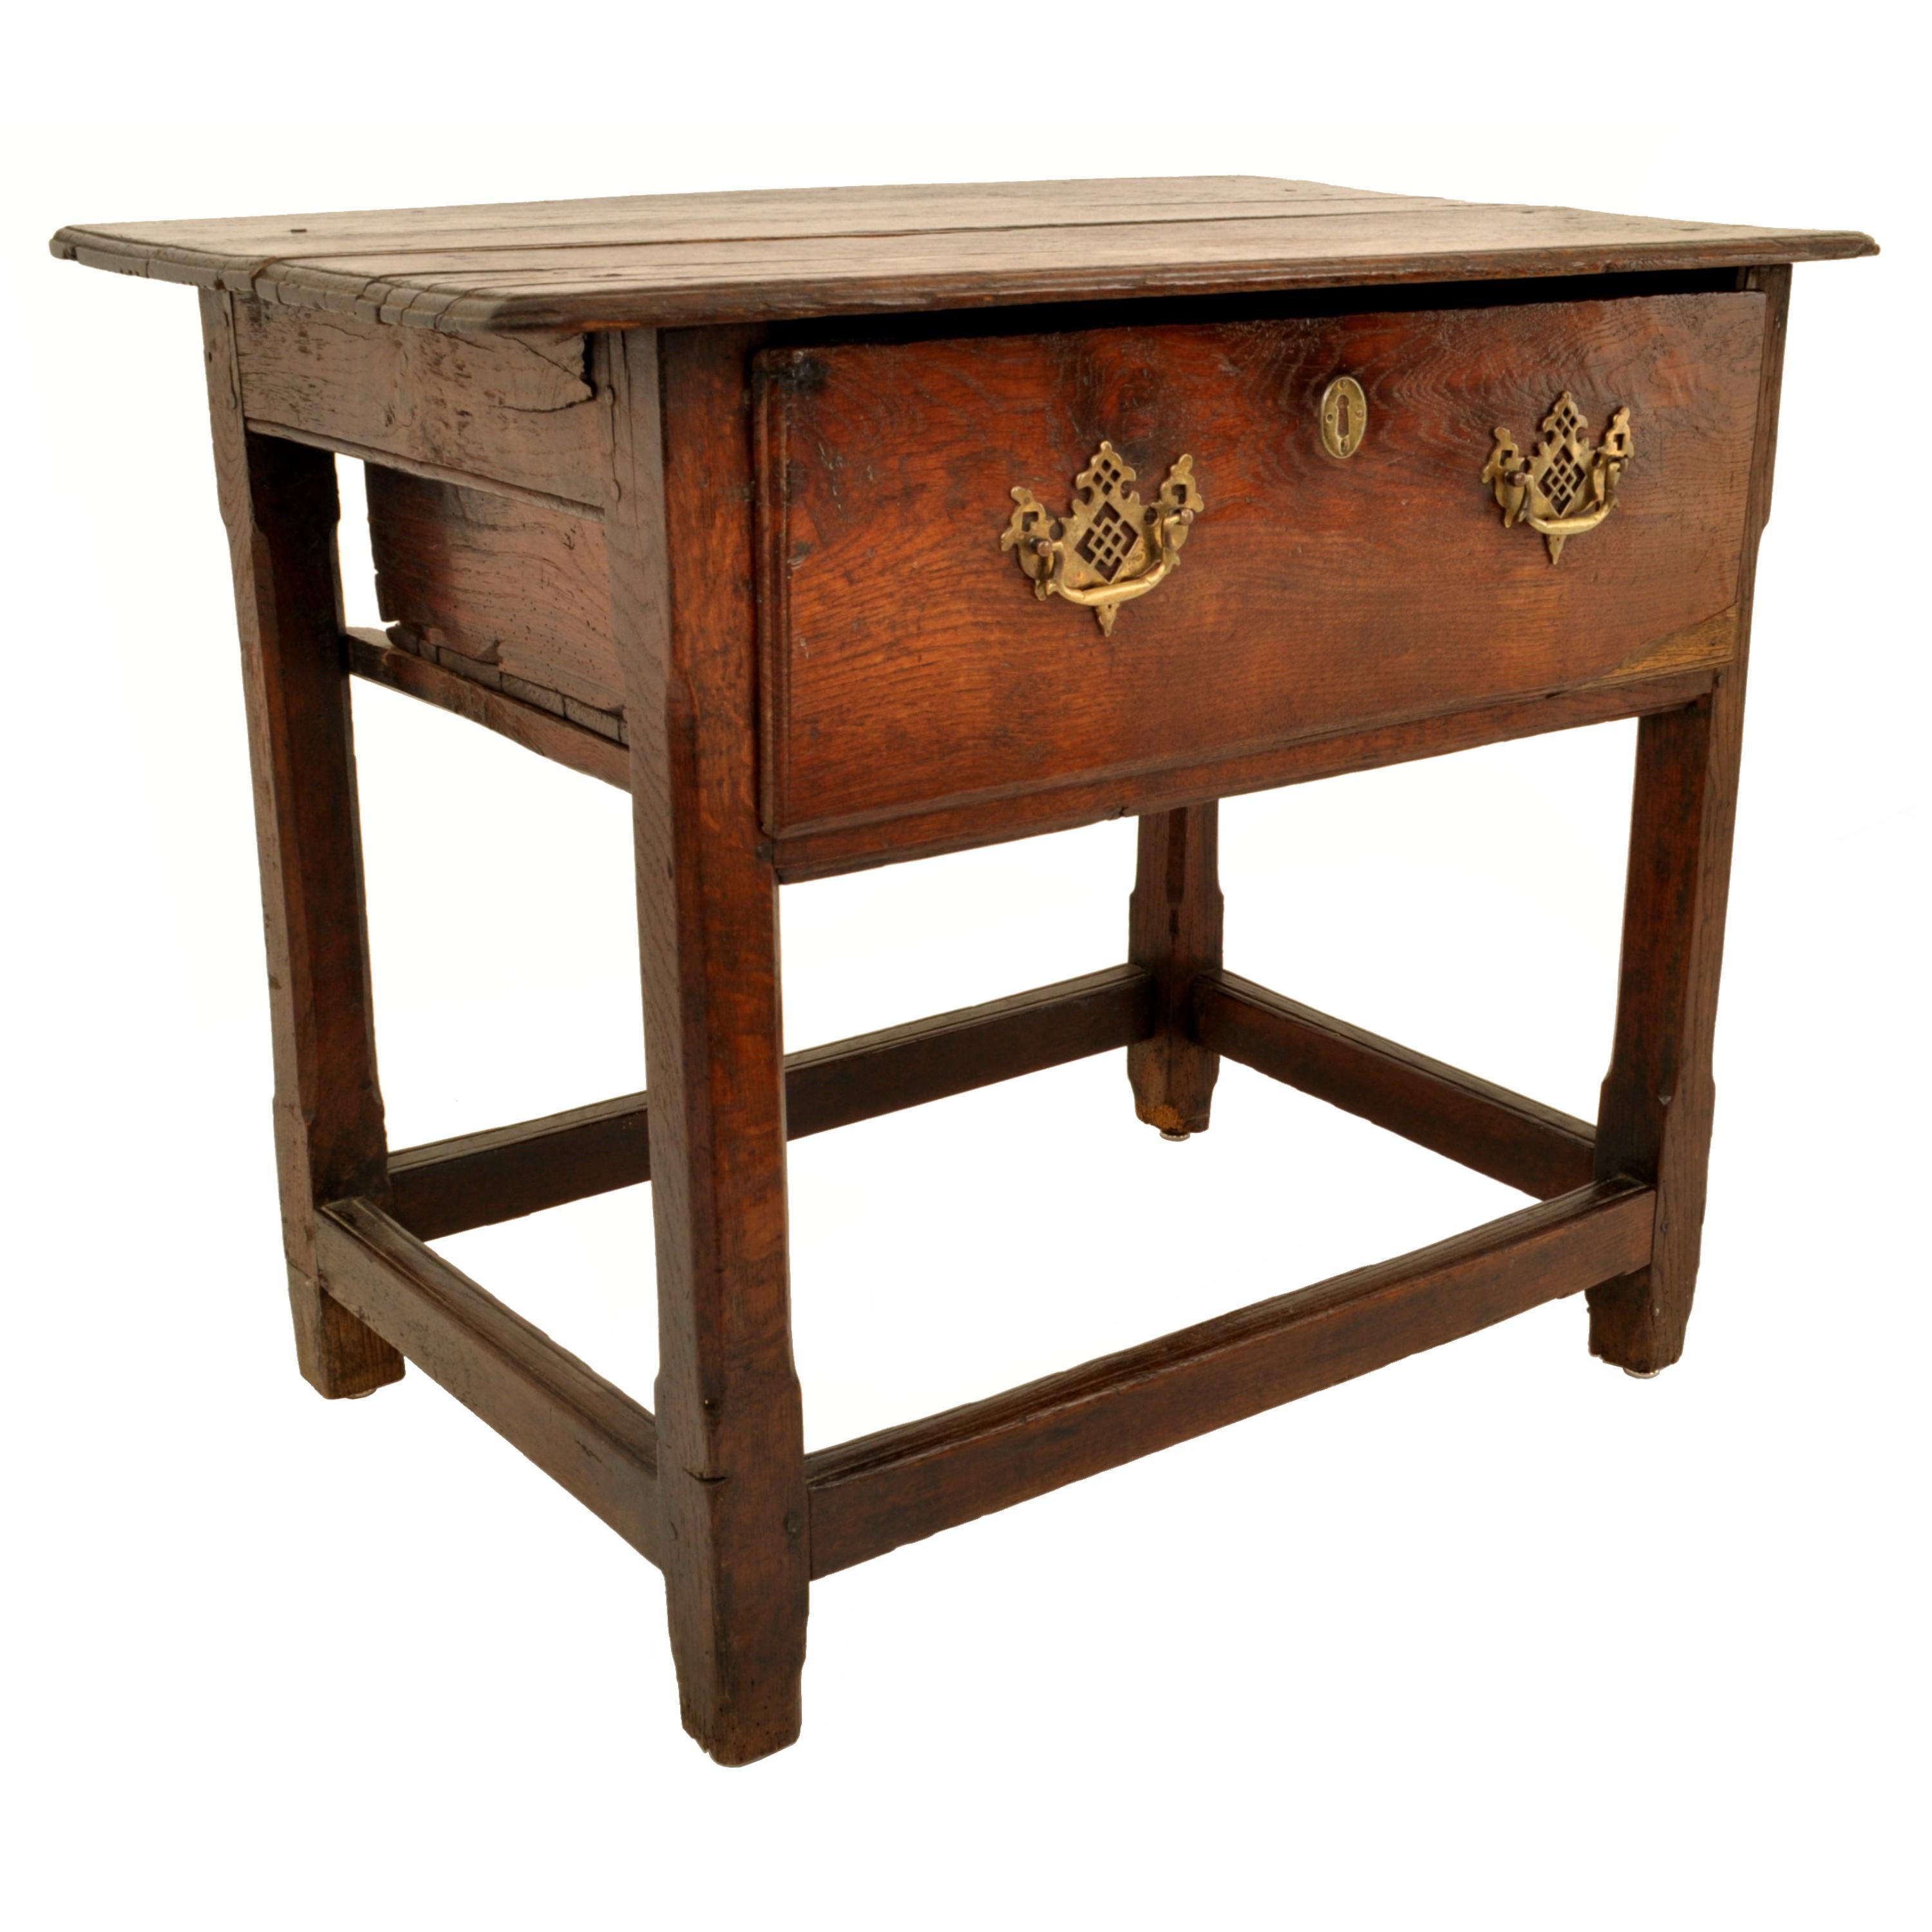 Antique George II oak tavern/side table, circa 1760.
The table having an overhanging top, with a single deep drawer to the center with pierced 'batwing' brasses, the table raised on chamfered legs and joined at the base with a stretcher on each